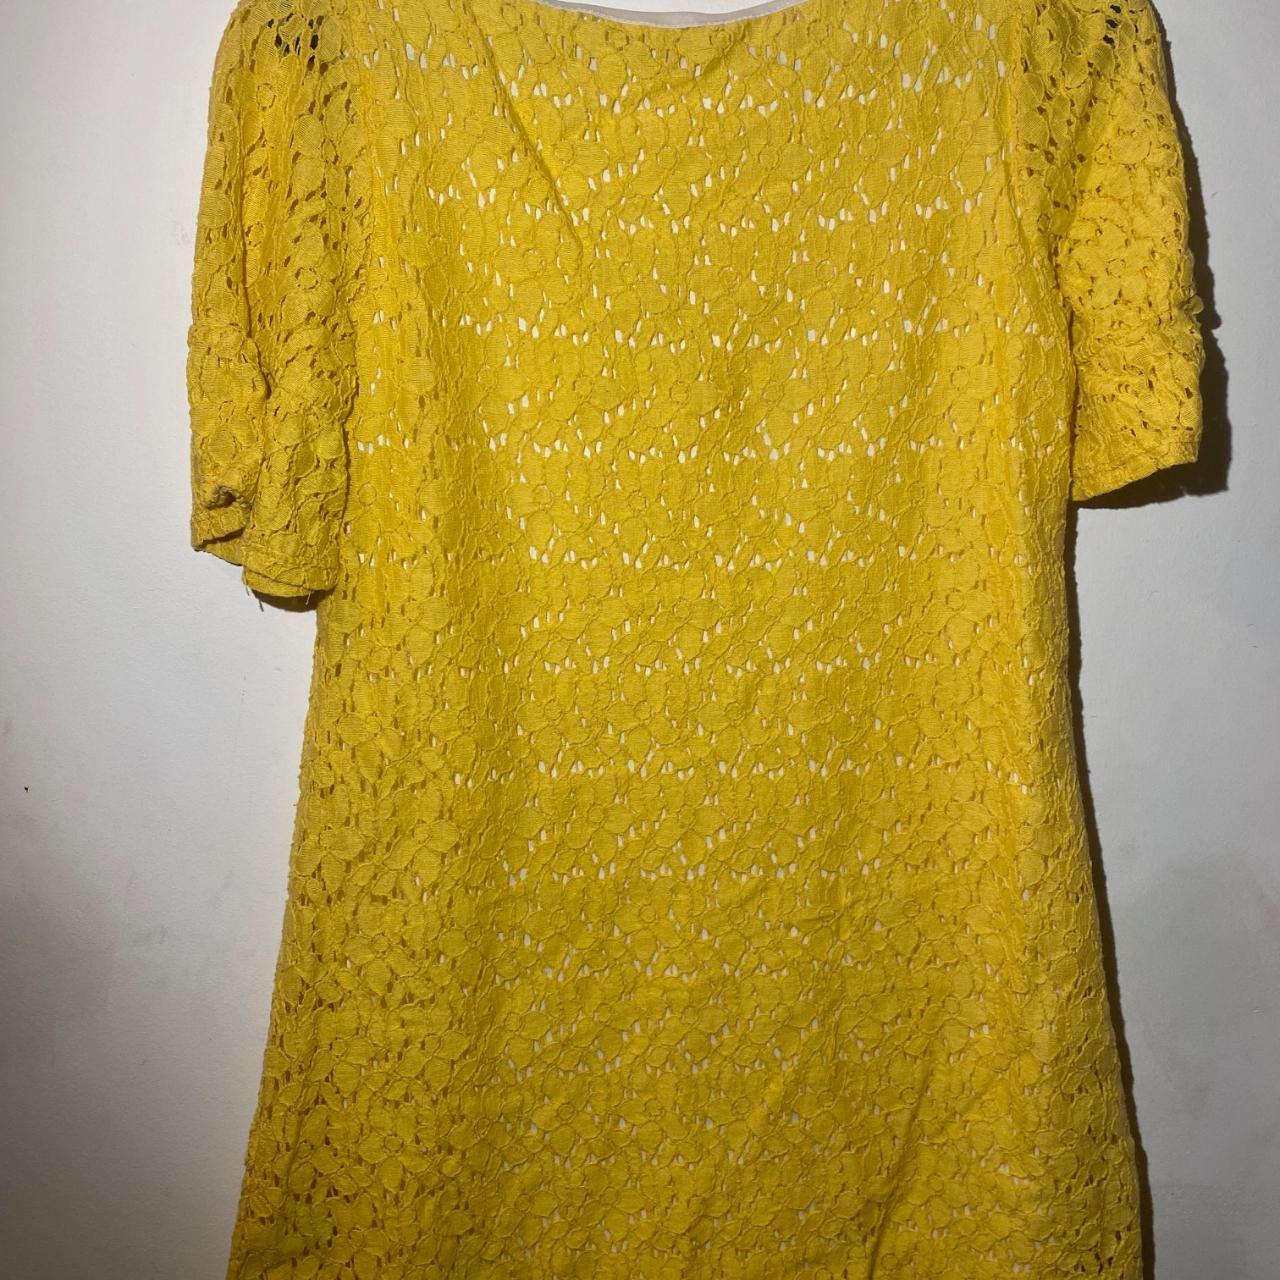 Small yellow dress with underling - Depop